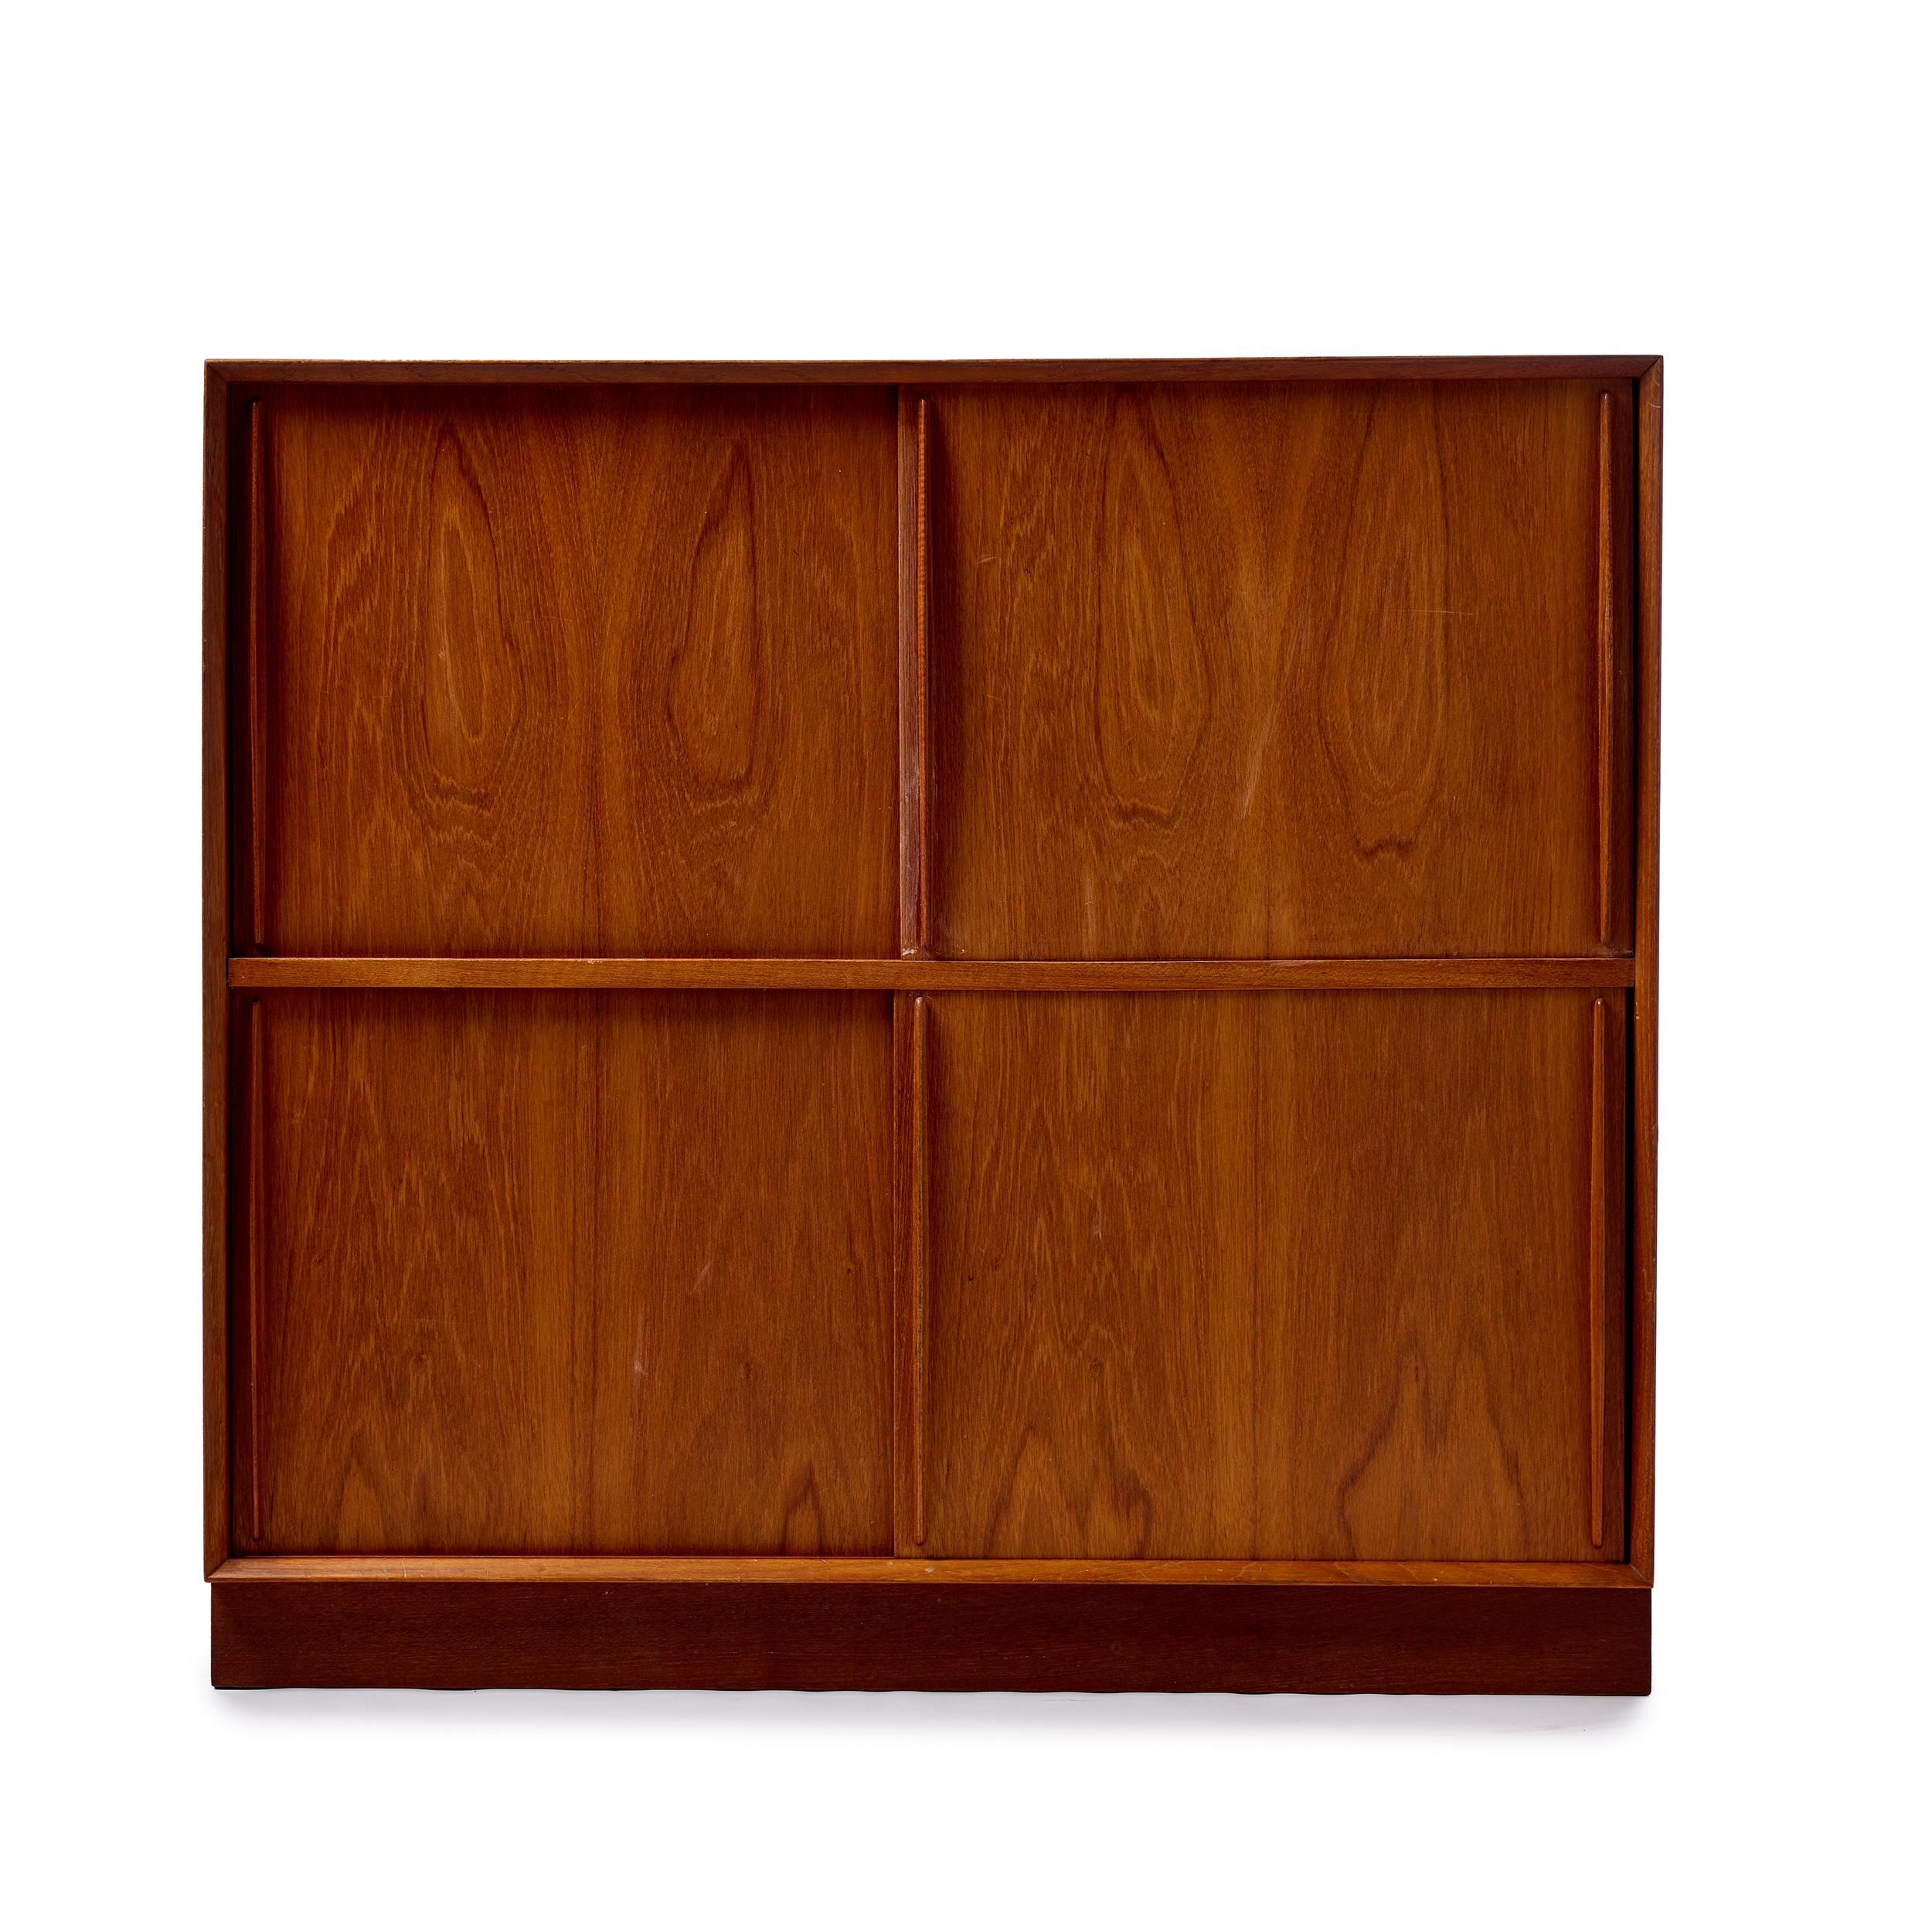 A Scandinavian modern modular cabinet by Peter Hvidt & Orla Mølgaard-Nielsen. Made of solid Burmese teak and features sliding doors, one fixed shelf and two adjustable shelves. Details offers beveled edge and finger jointed details.
Produced in